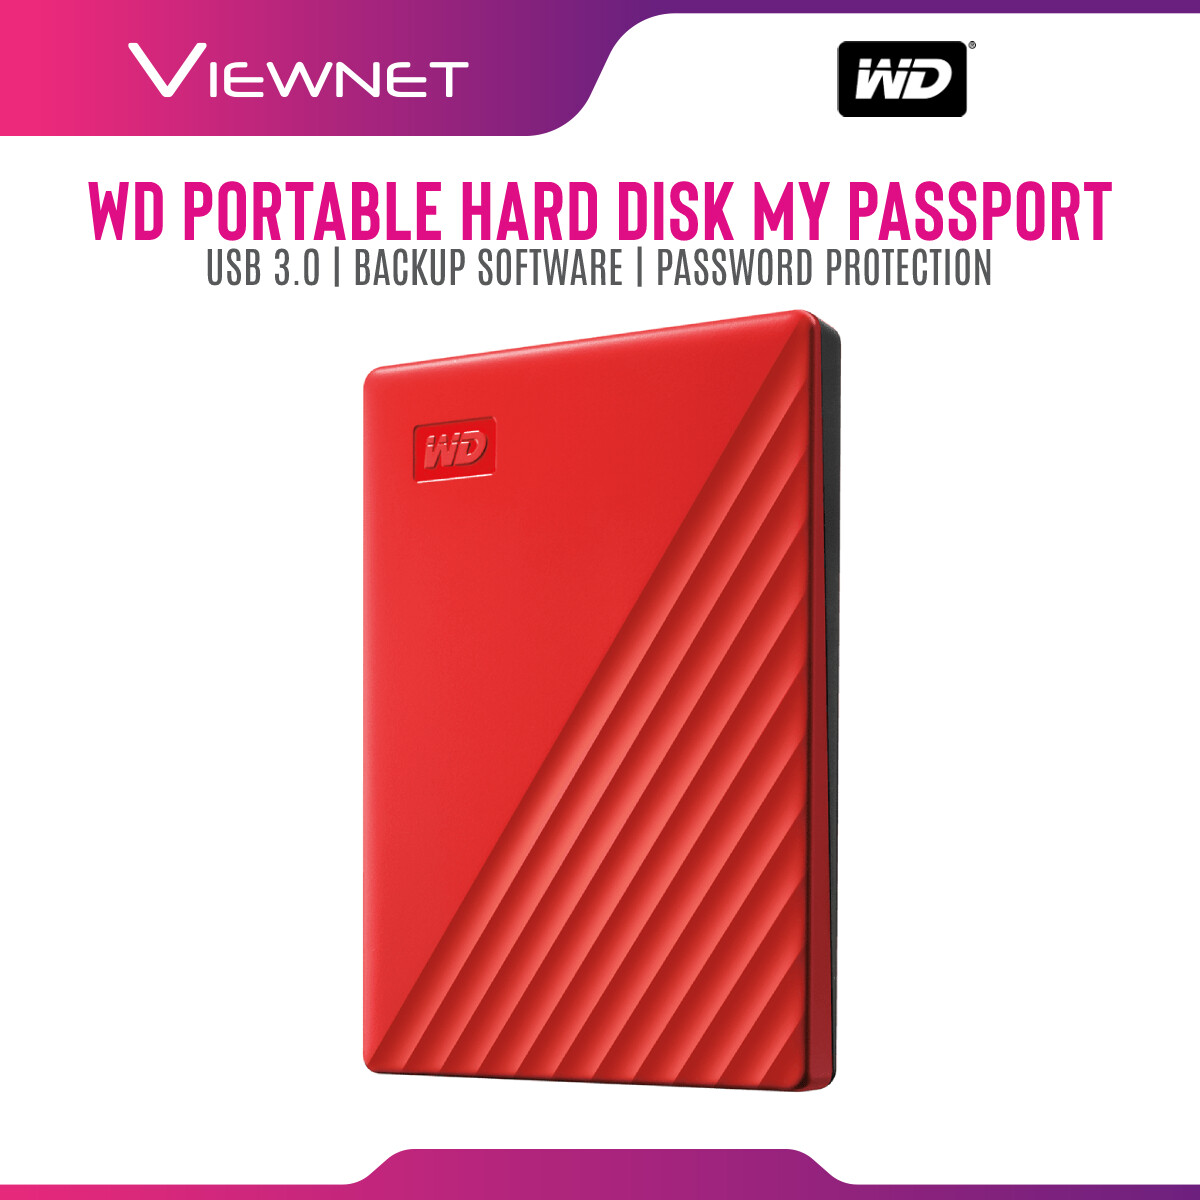 WD Western Digital My Passport  4TB ( RED ) Slim Portable External Hard Disk USB 3.0 With WD Backup Software & Password Protection